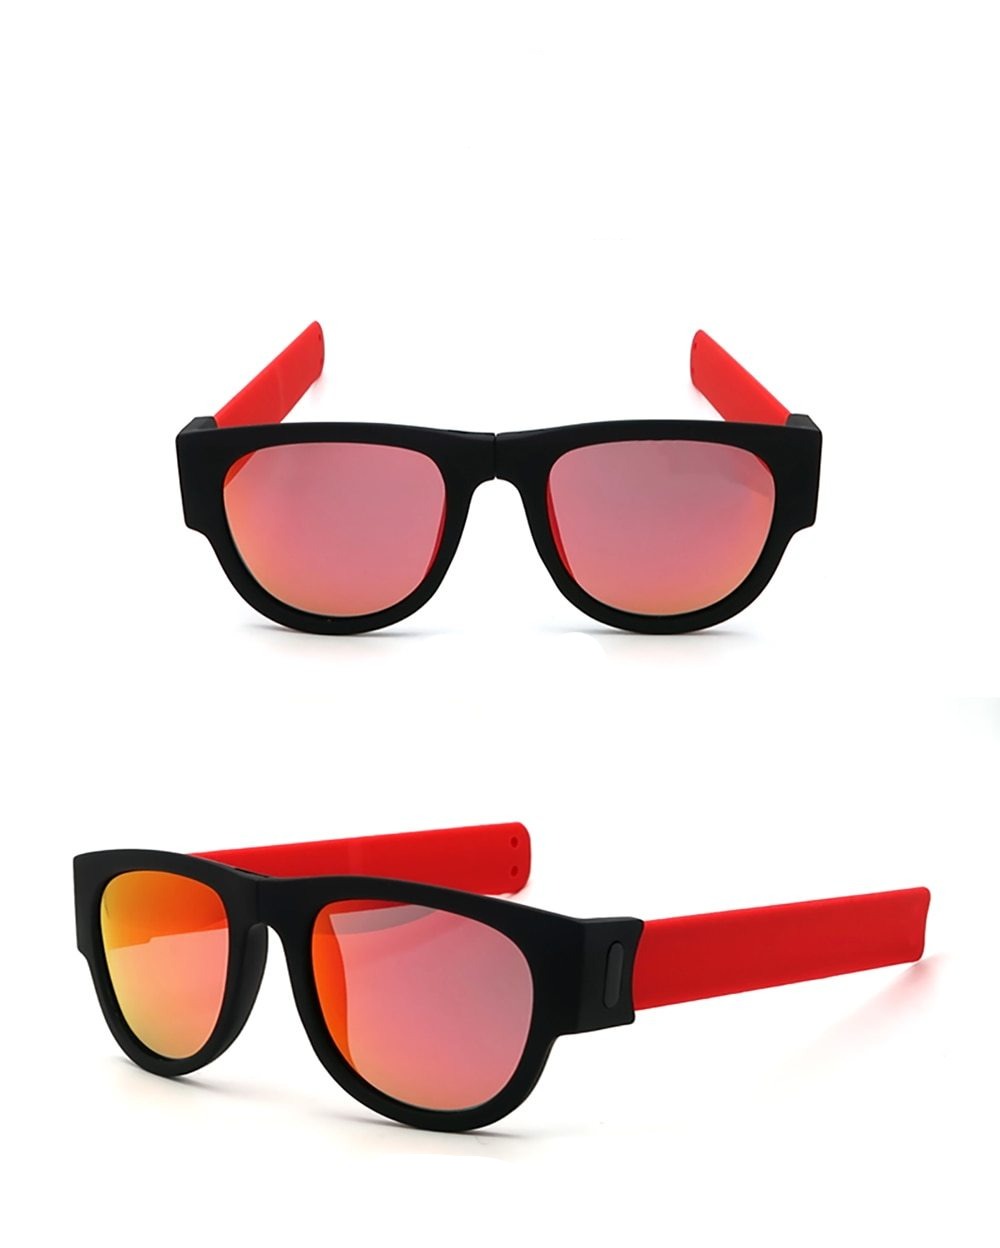 Front and side view Foldable Wristband Shades orange Polaroid lens red side arms